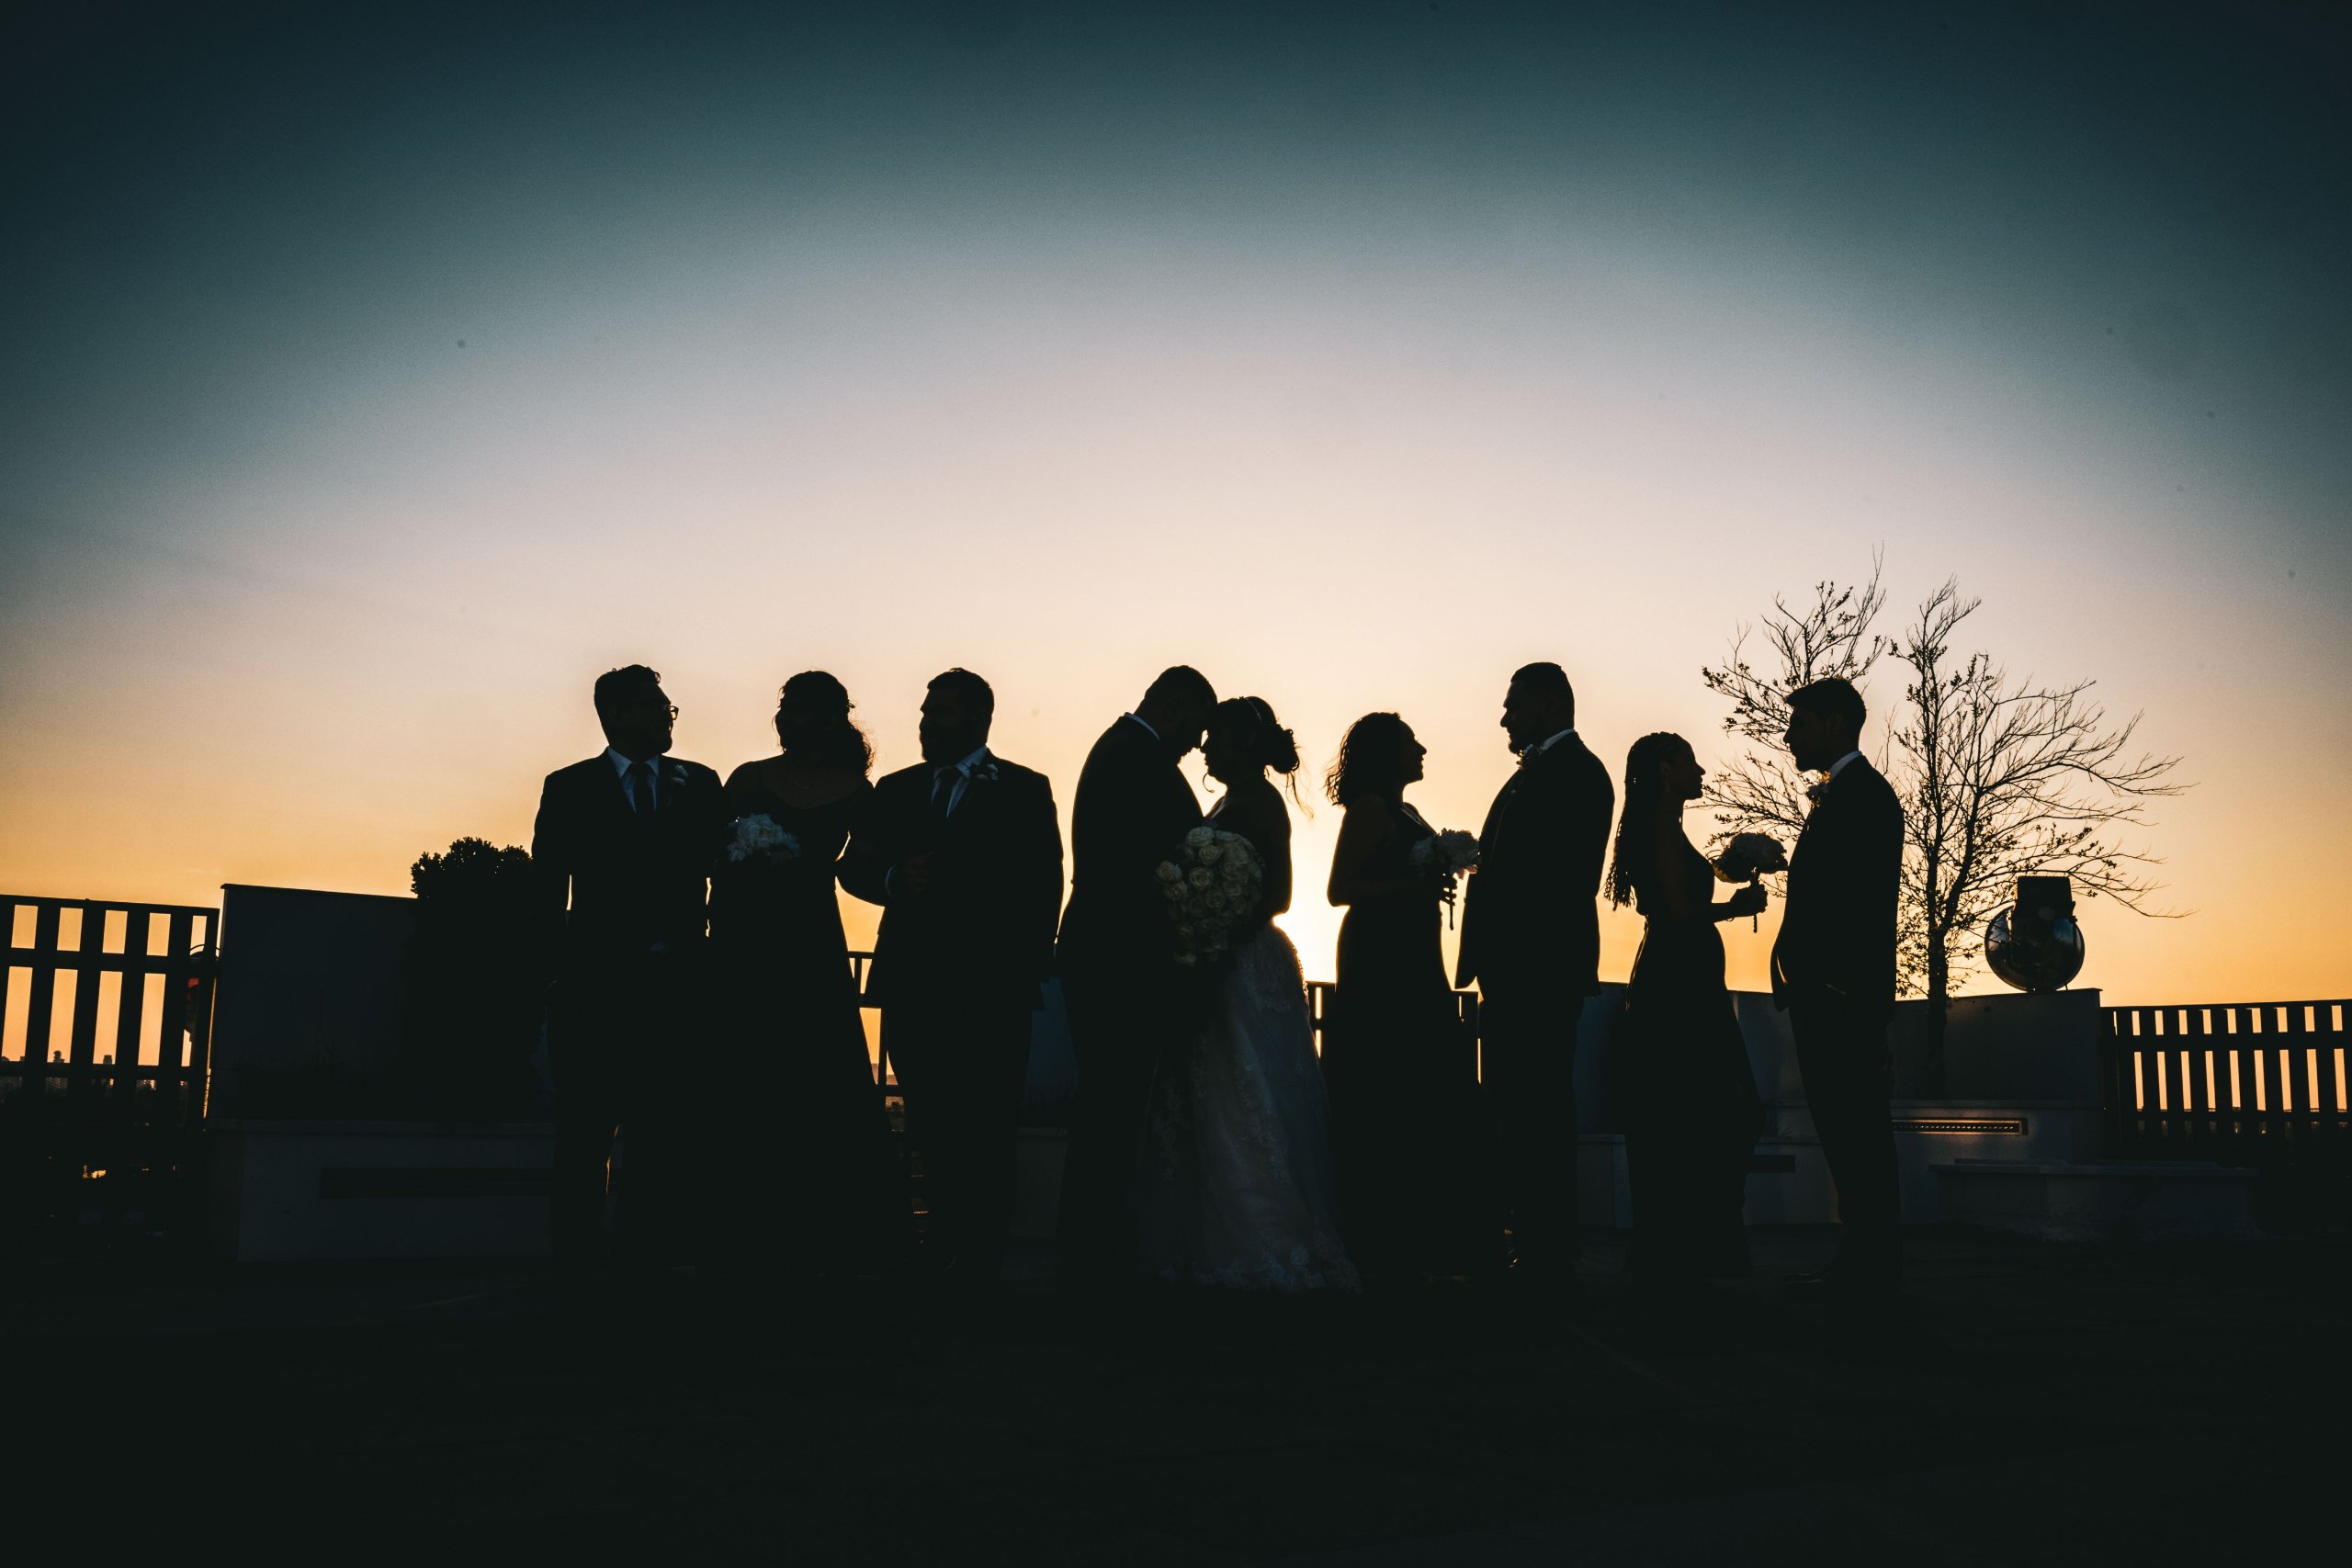 A silhouette of a wedding party in front of a sunset.